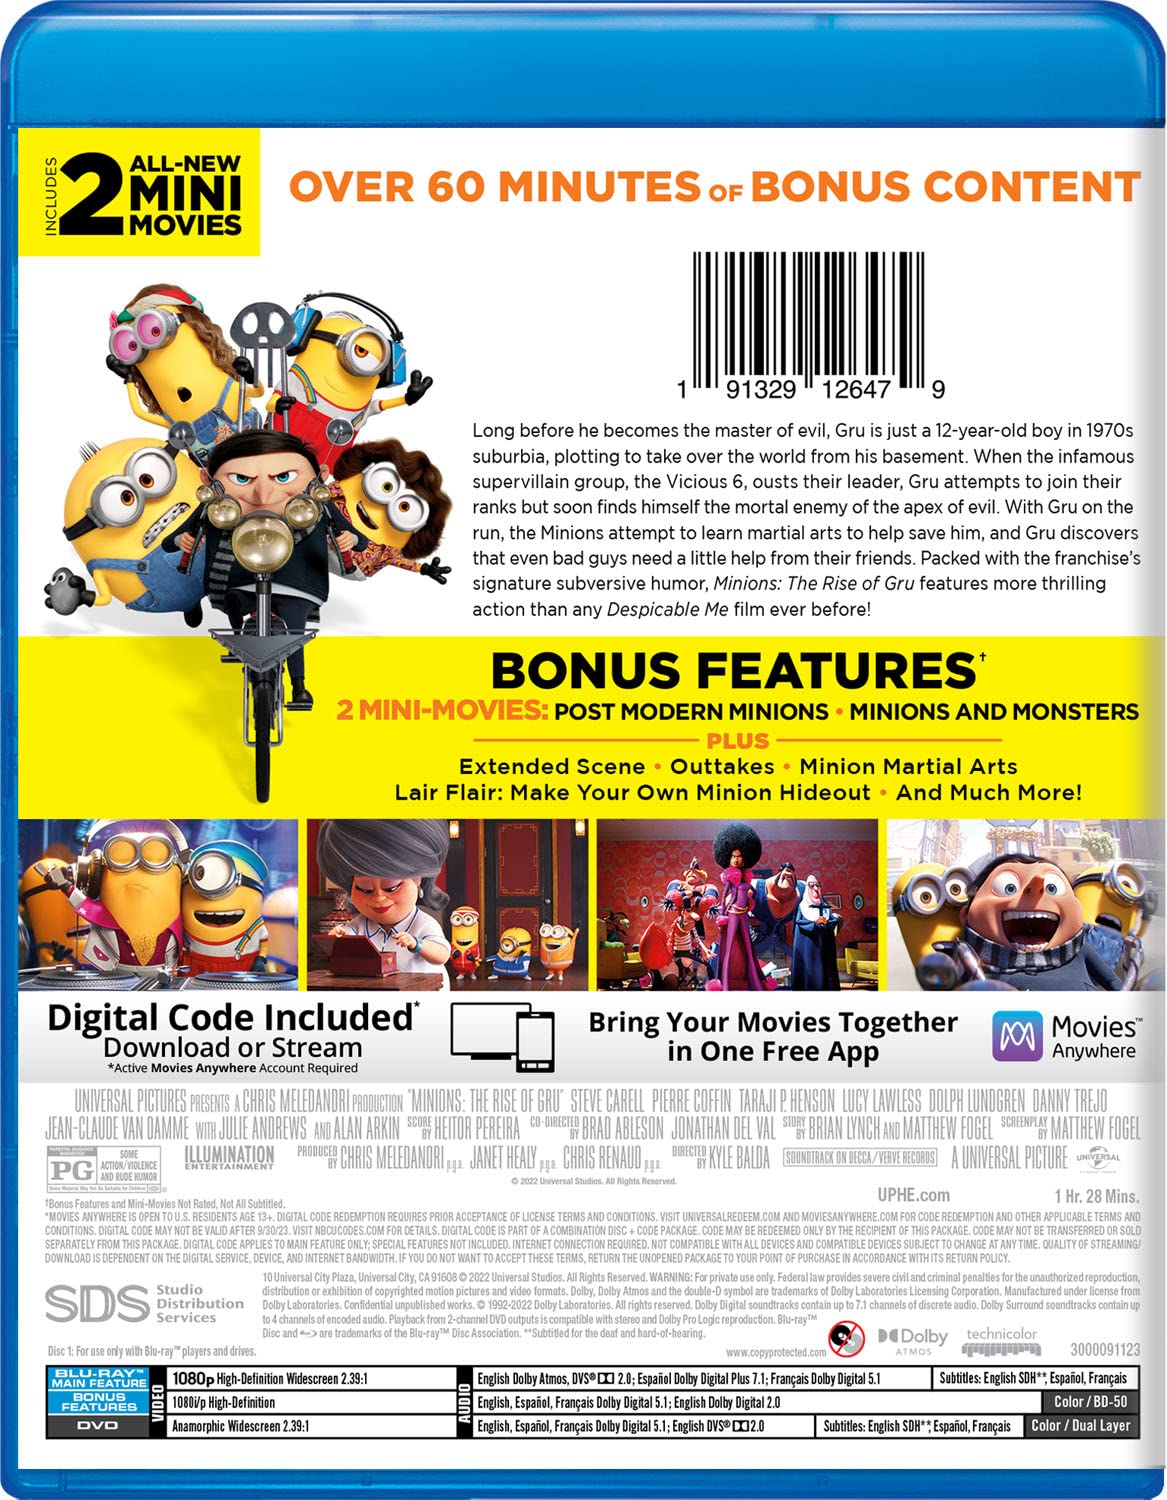 Minions- The Rise of Gru Blu-ray Collectors Edition Reverse